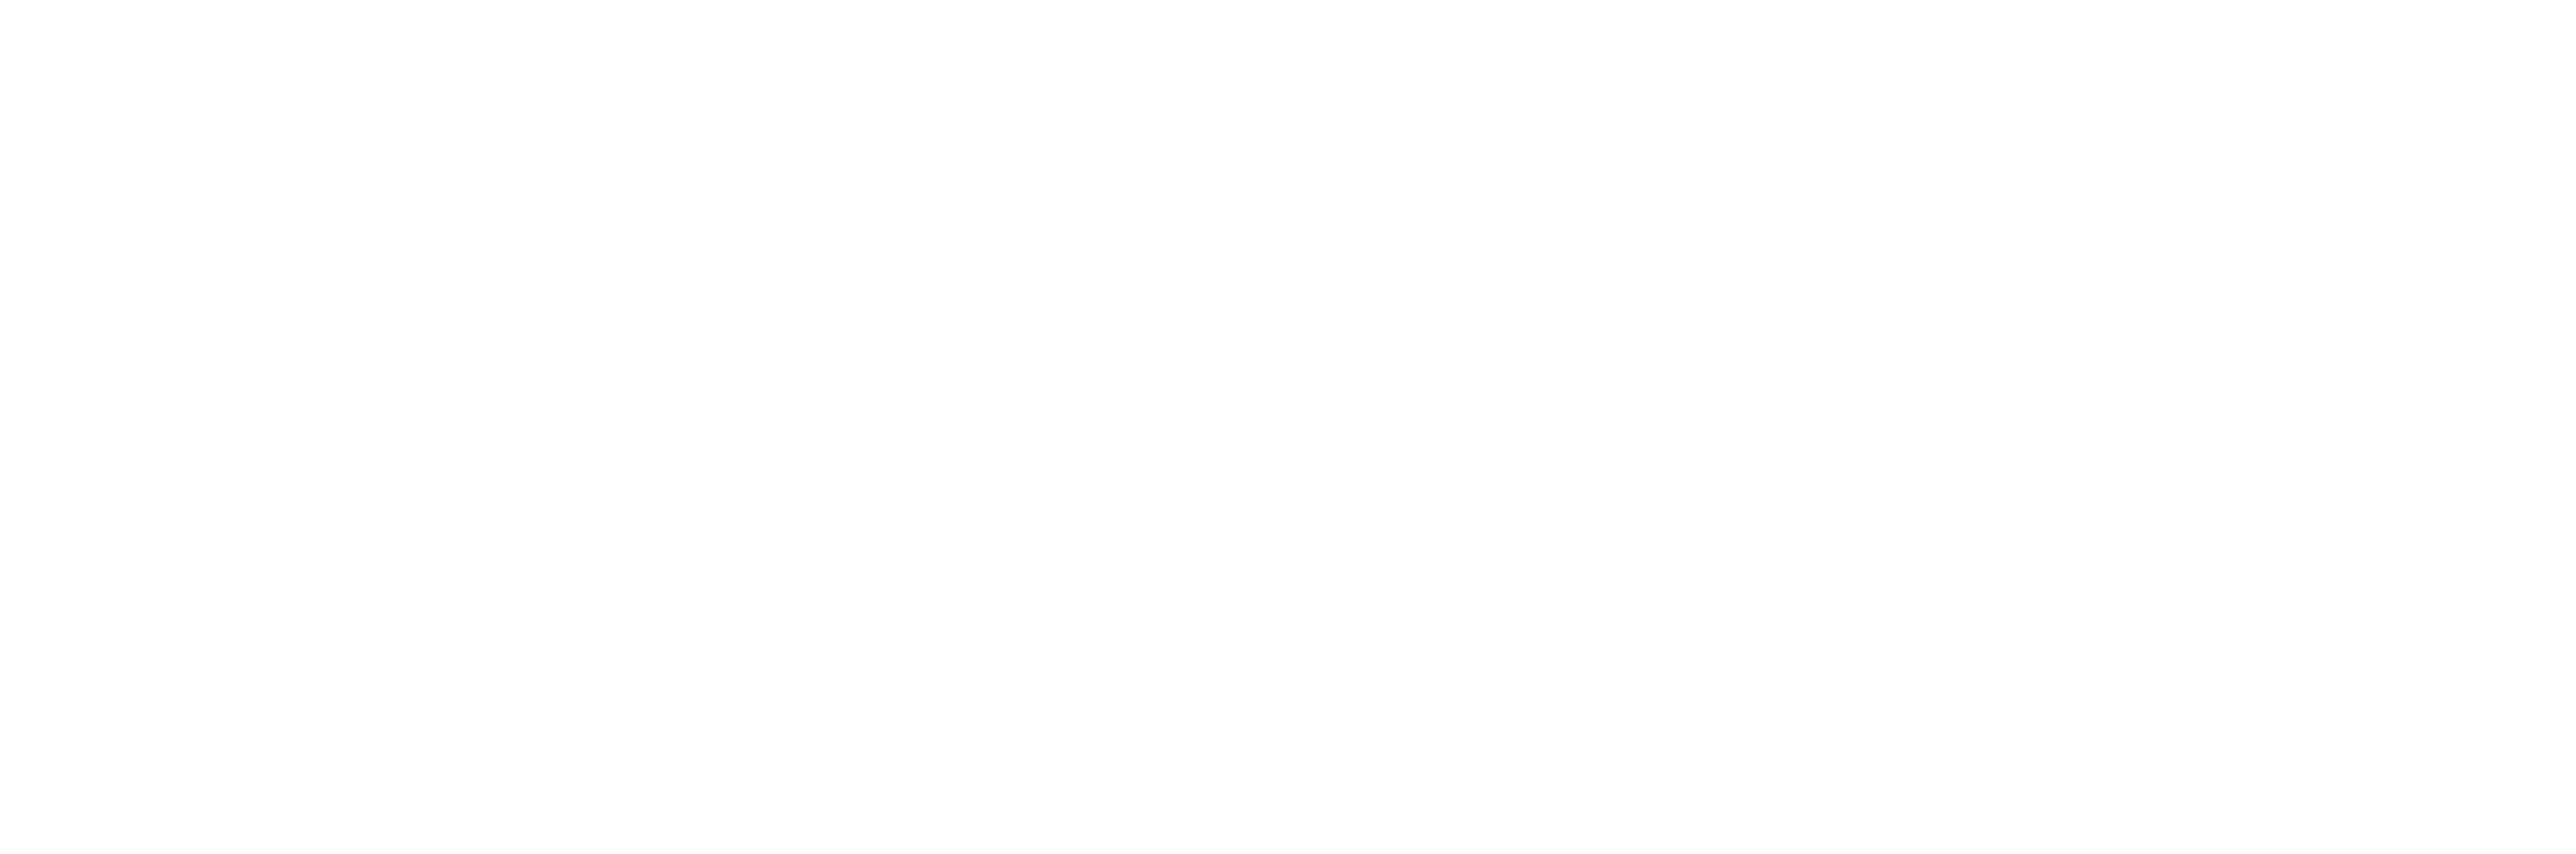 Mindful Leadership Consultants